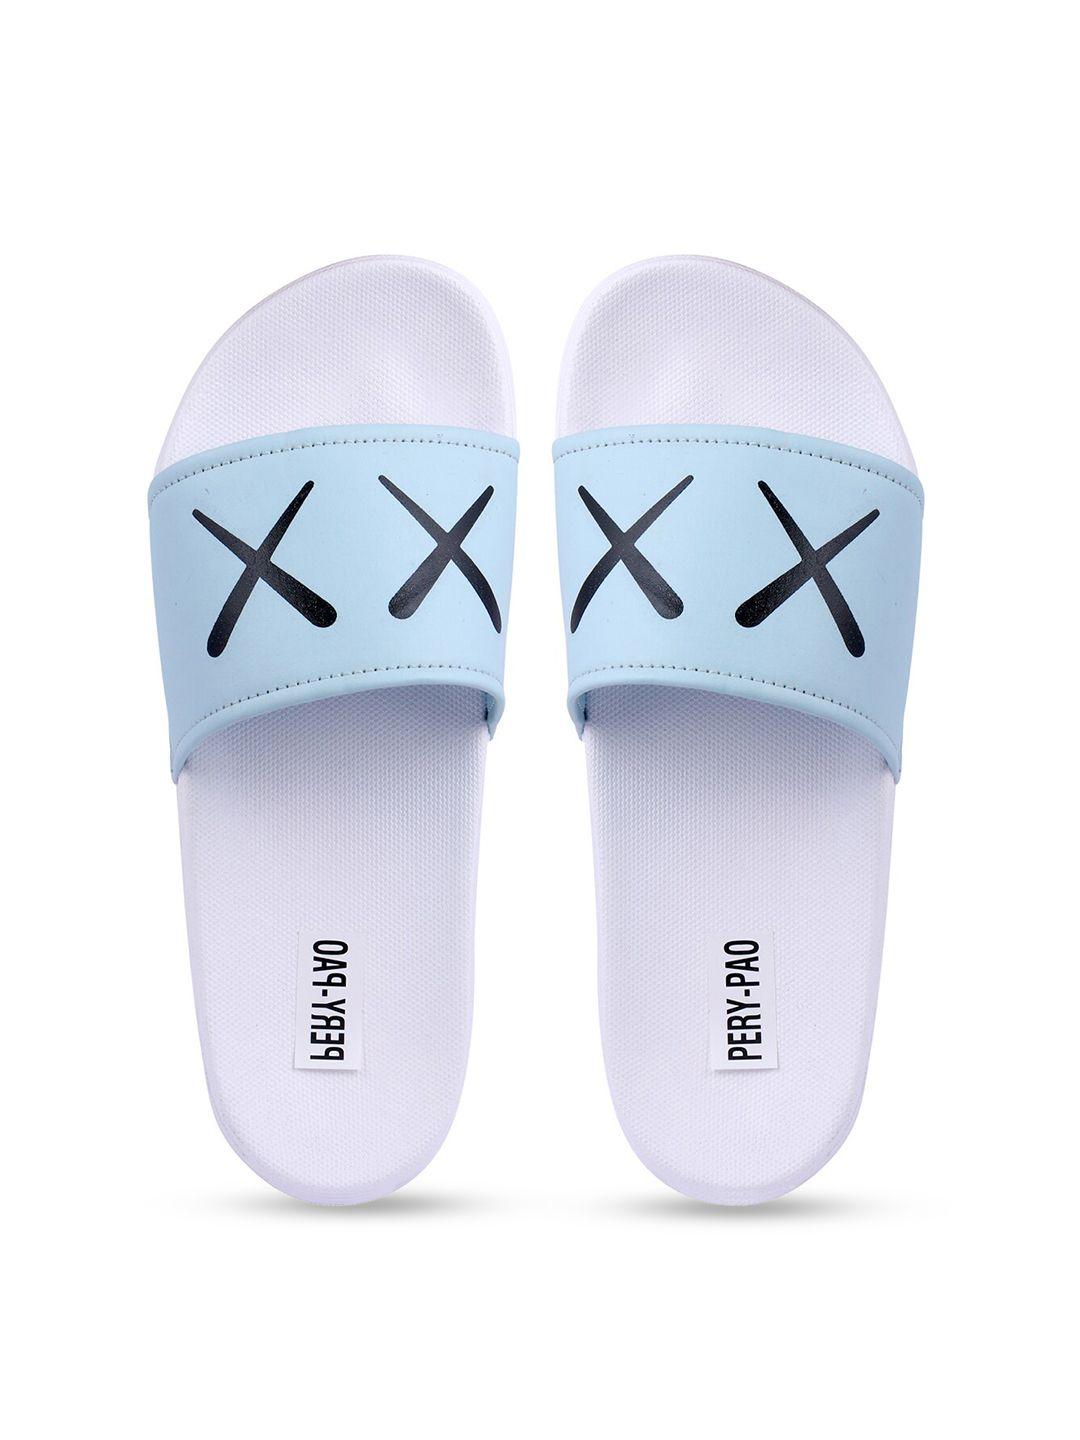 pery pao men turquoise blue & white printed rubber sliders